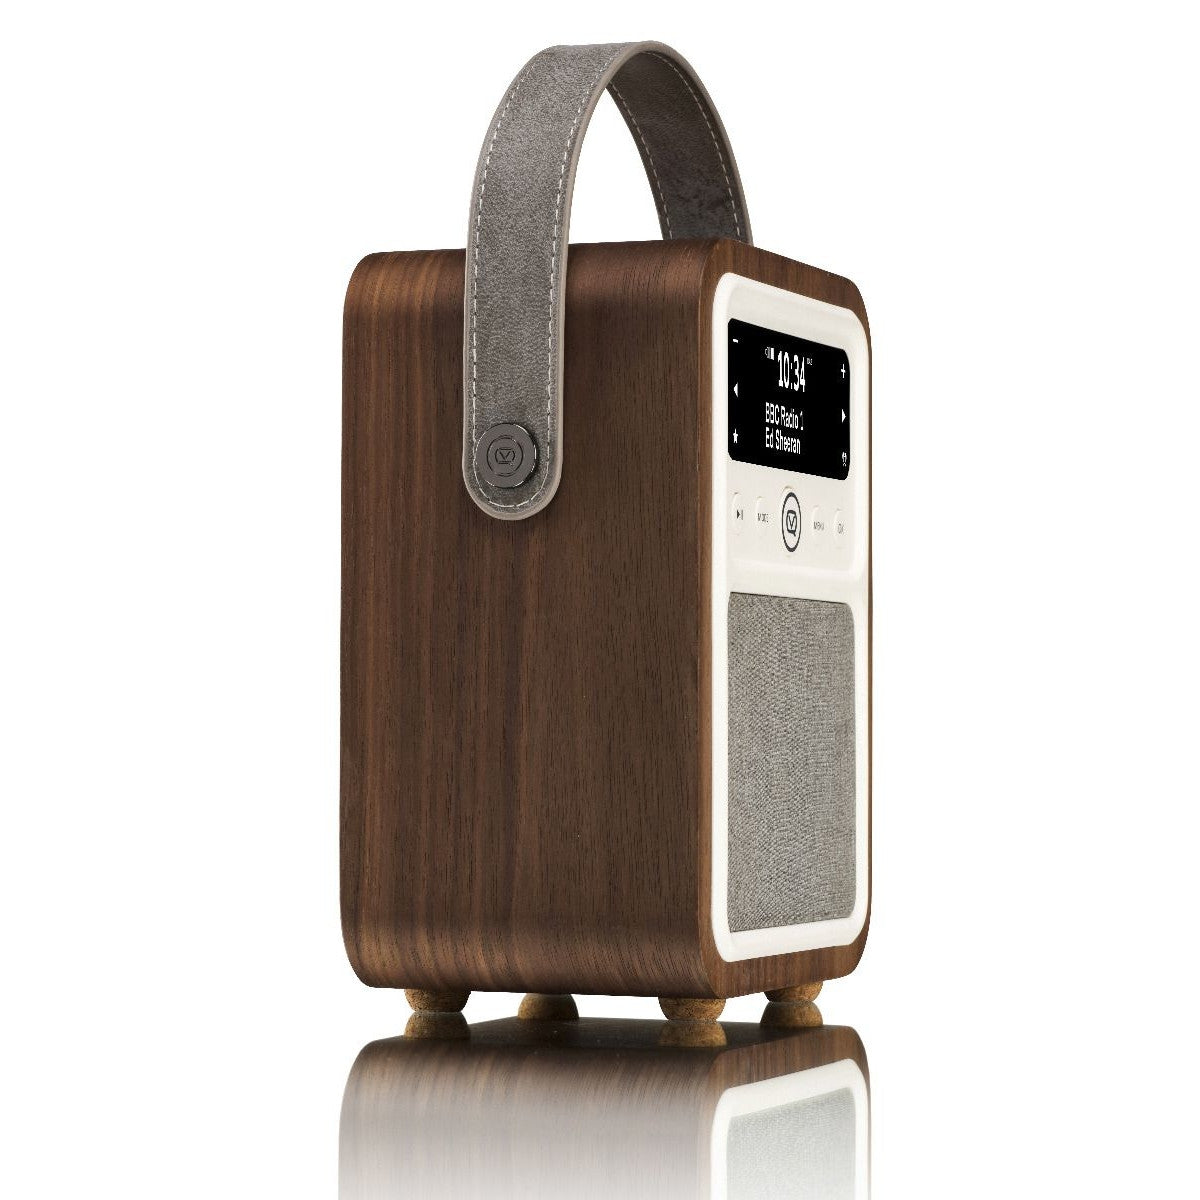 VQ Monty Portable DAB/FM Radio & Bluetooth Speaker with Rechargeable Battery Pack in Walnut - 5